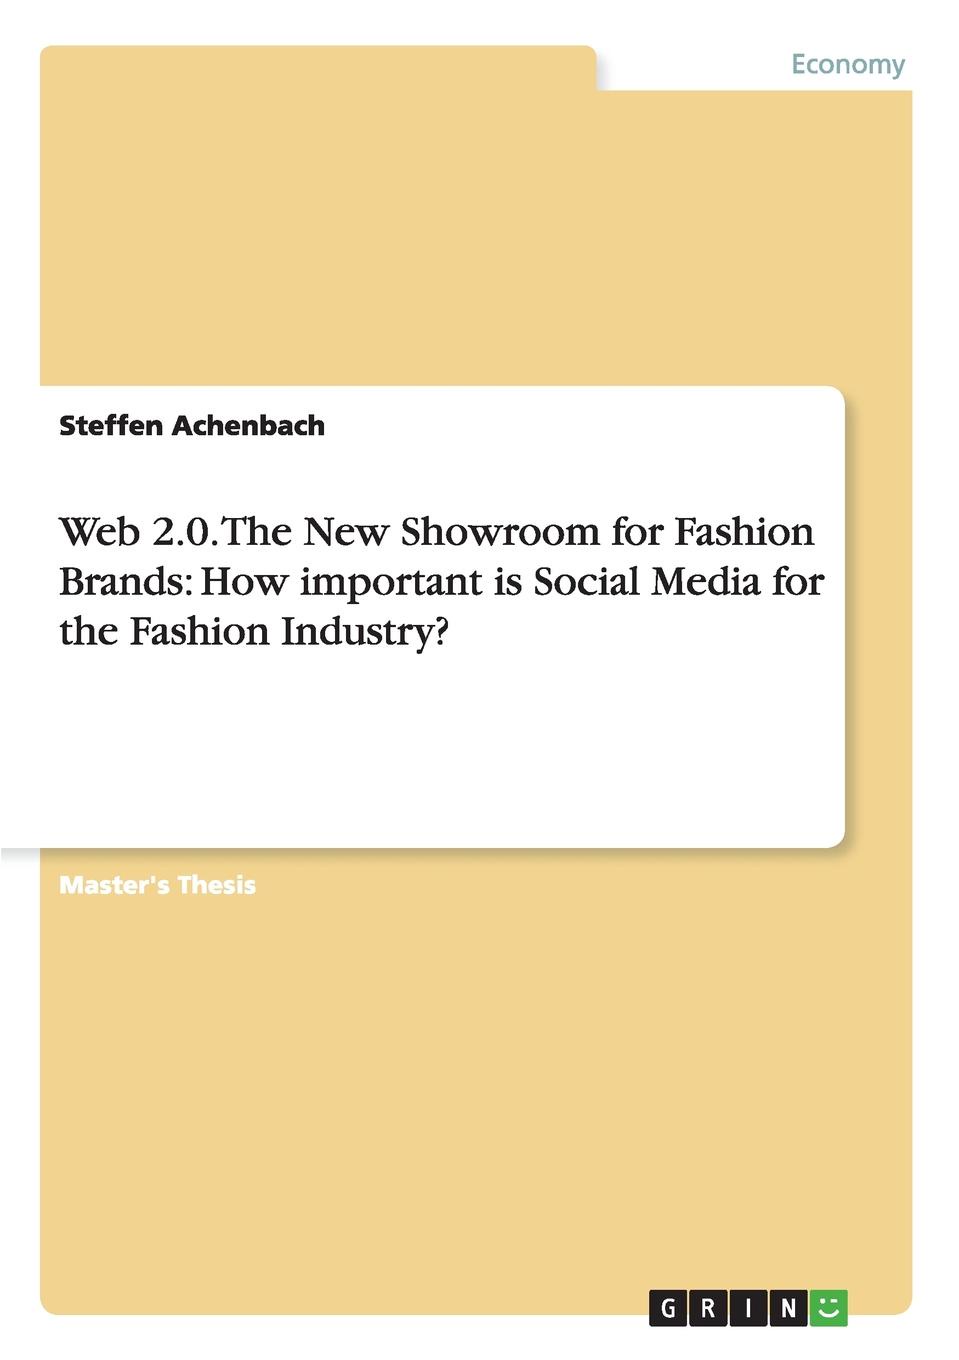 Web 2.0. The New Showroom for Fashion Brands. How important is Social Media for the Fashion Industry.